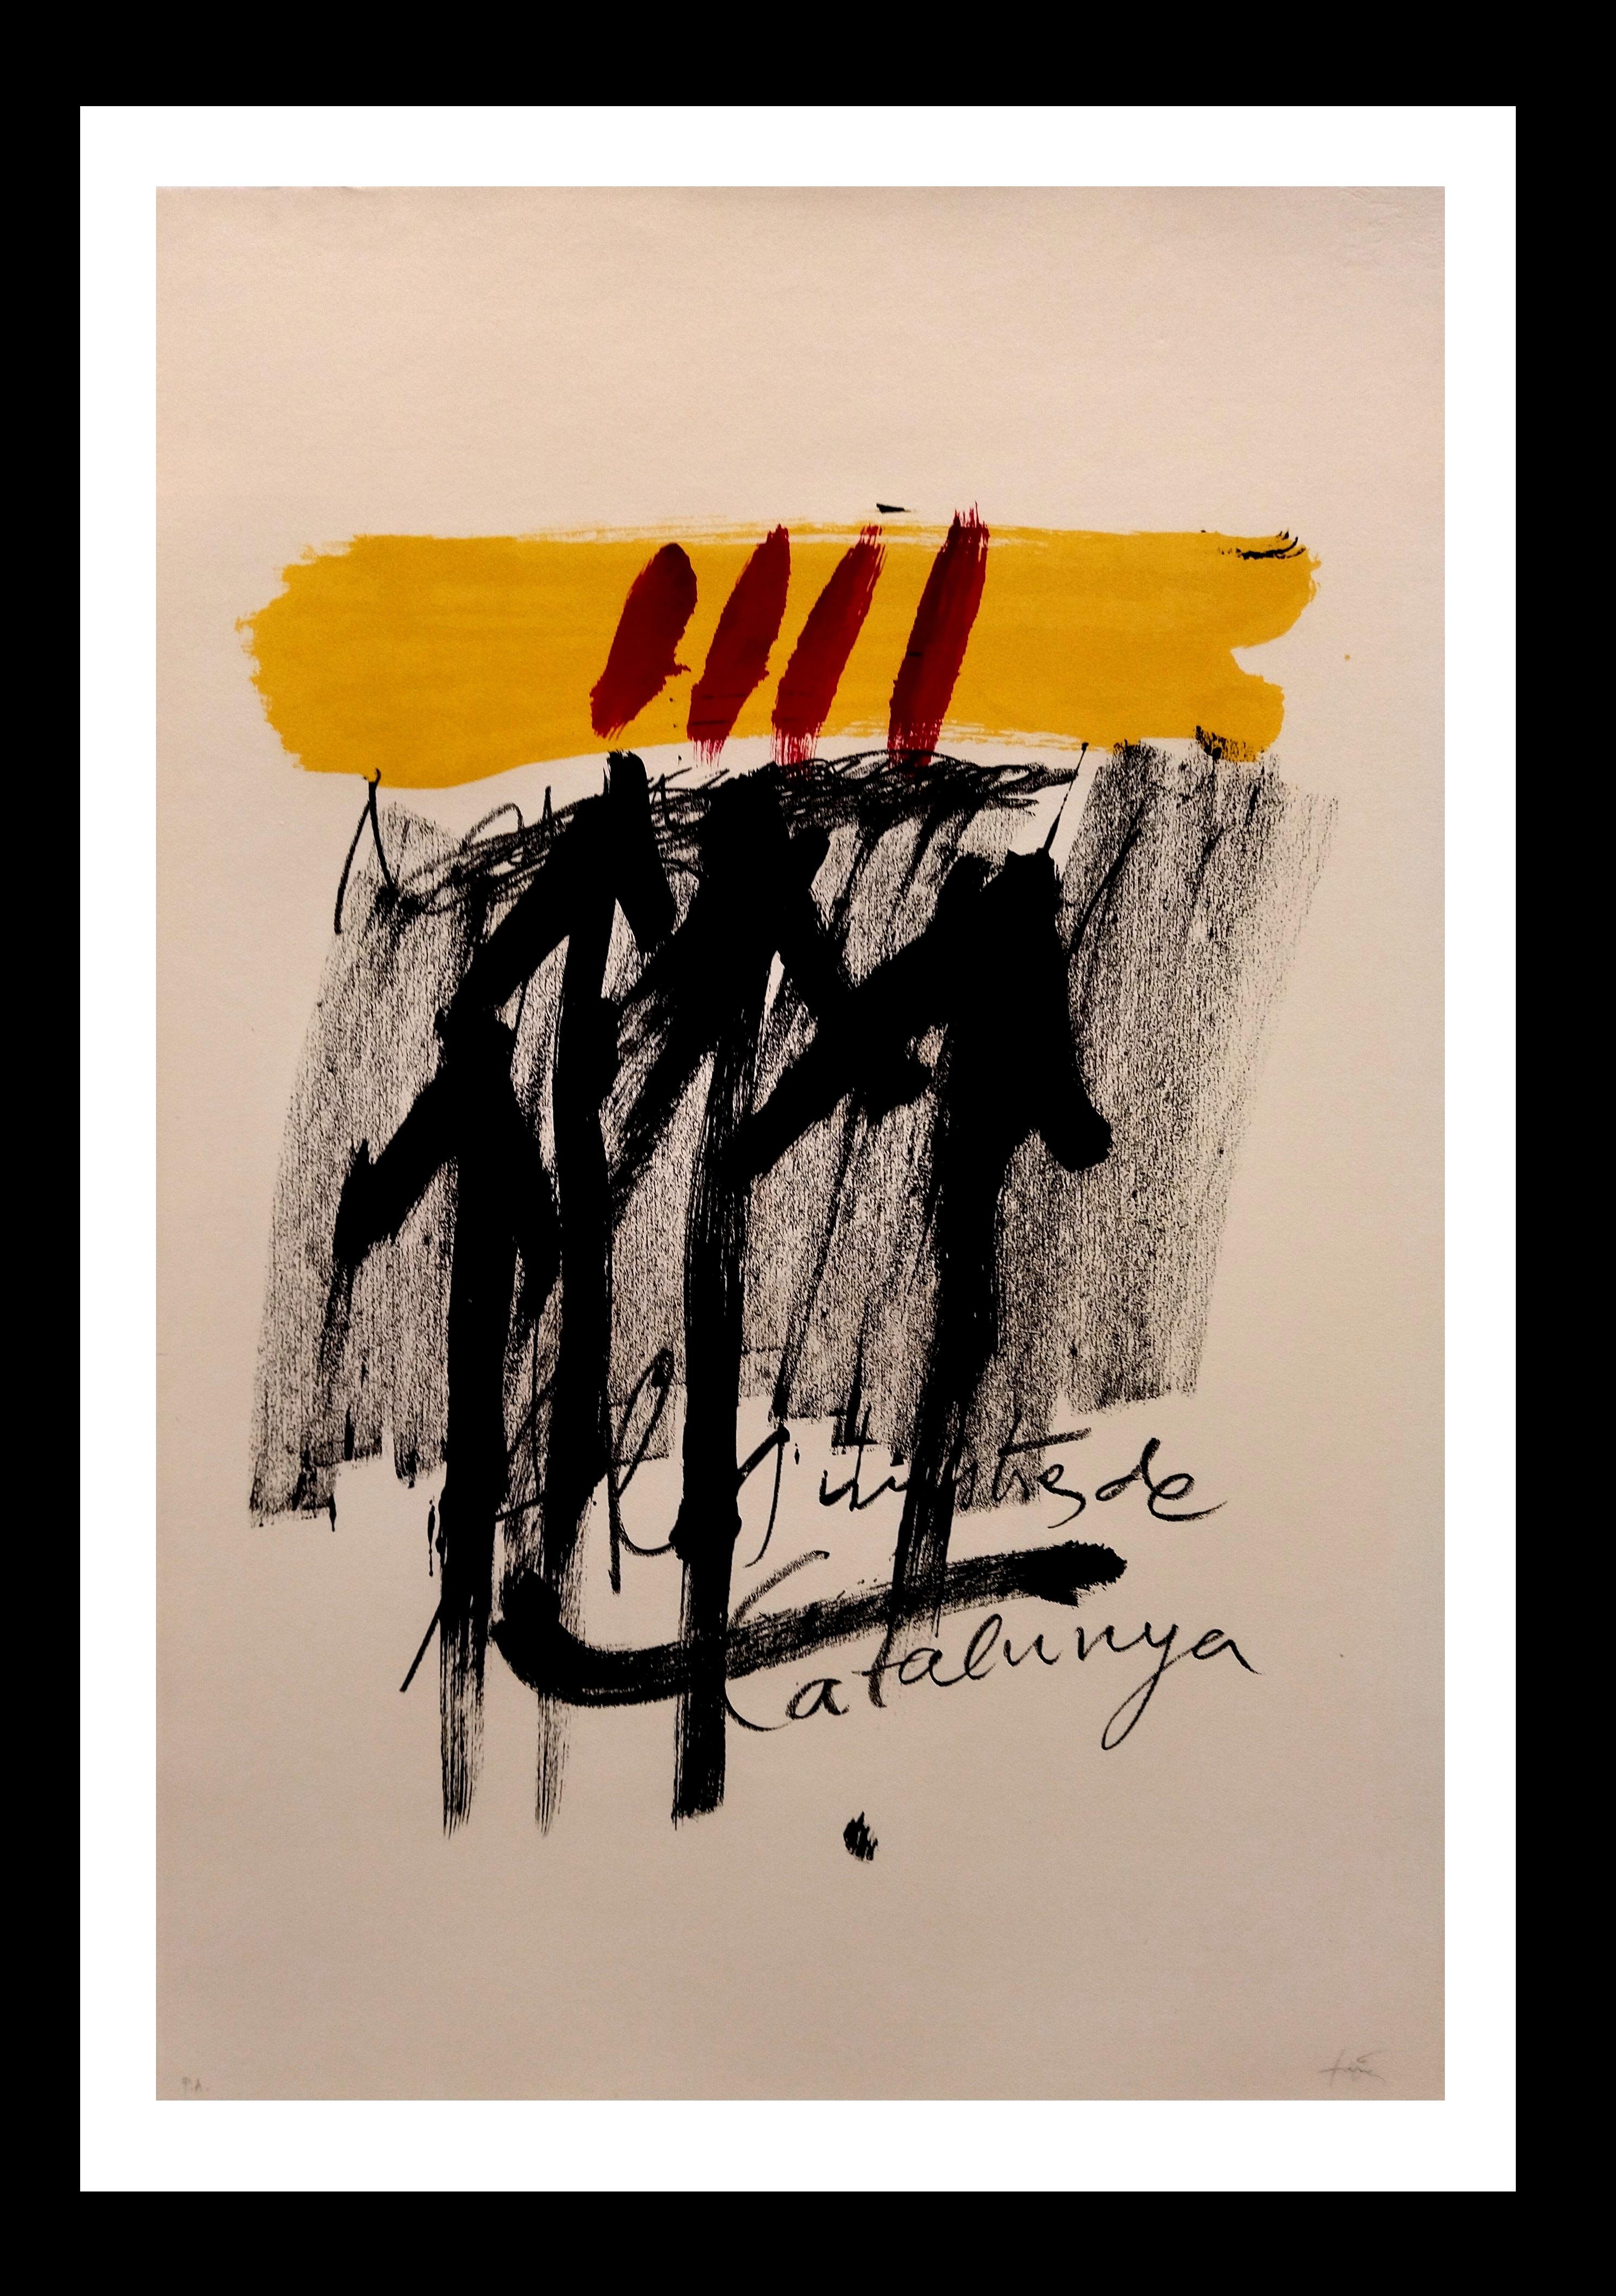 Antoni Tàpies Abstract Print -  Tapies  Black  Red  Yellow  Vertical  original lithograph painting